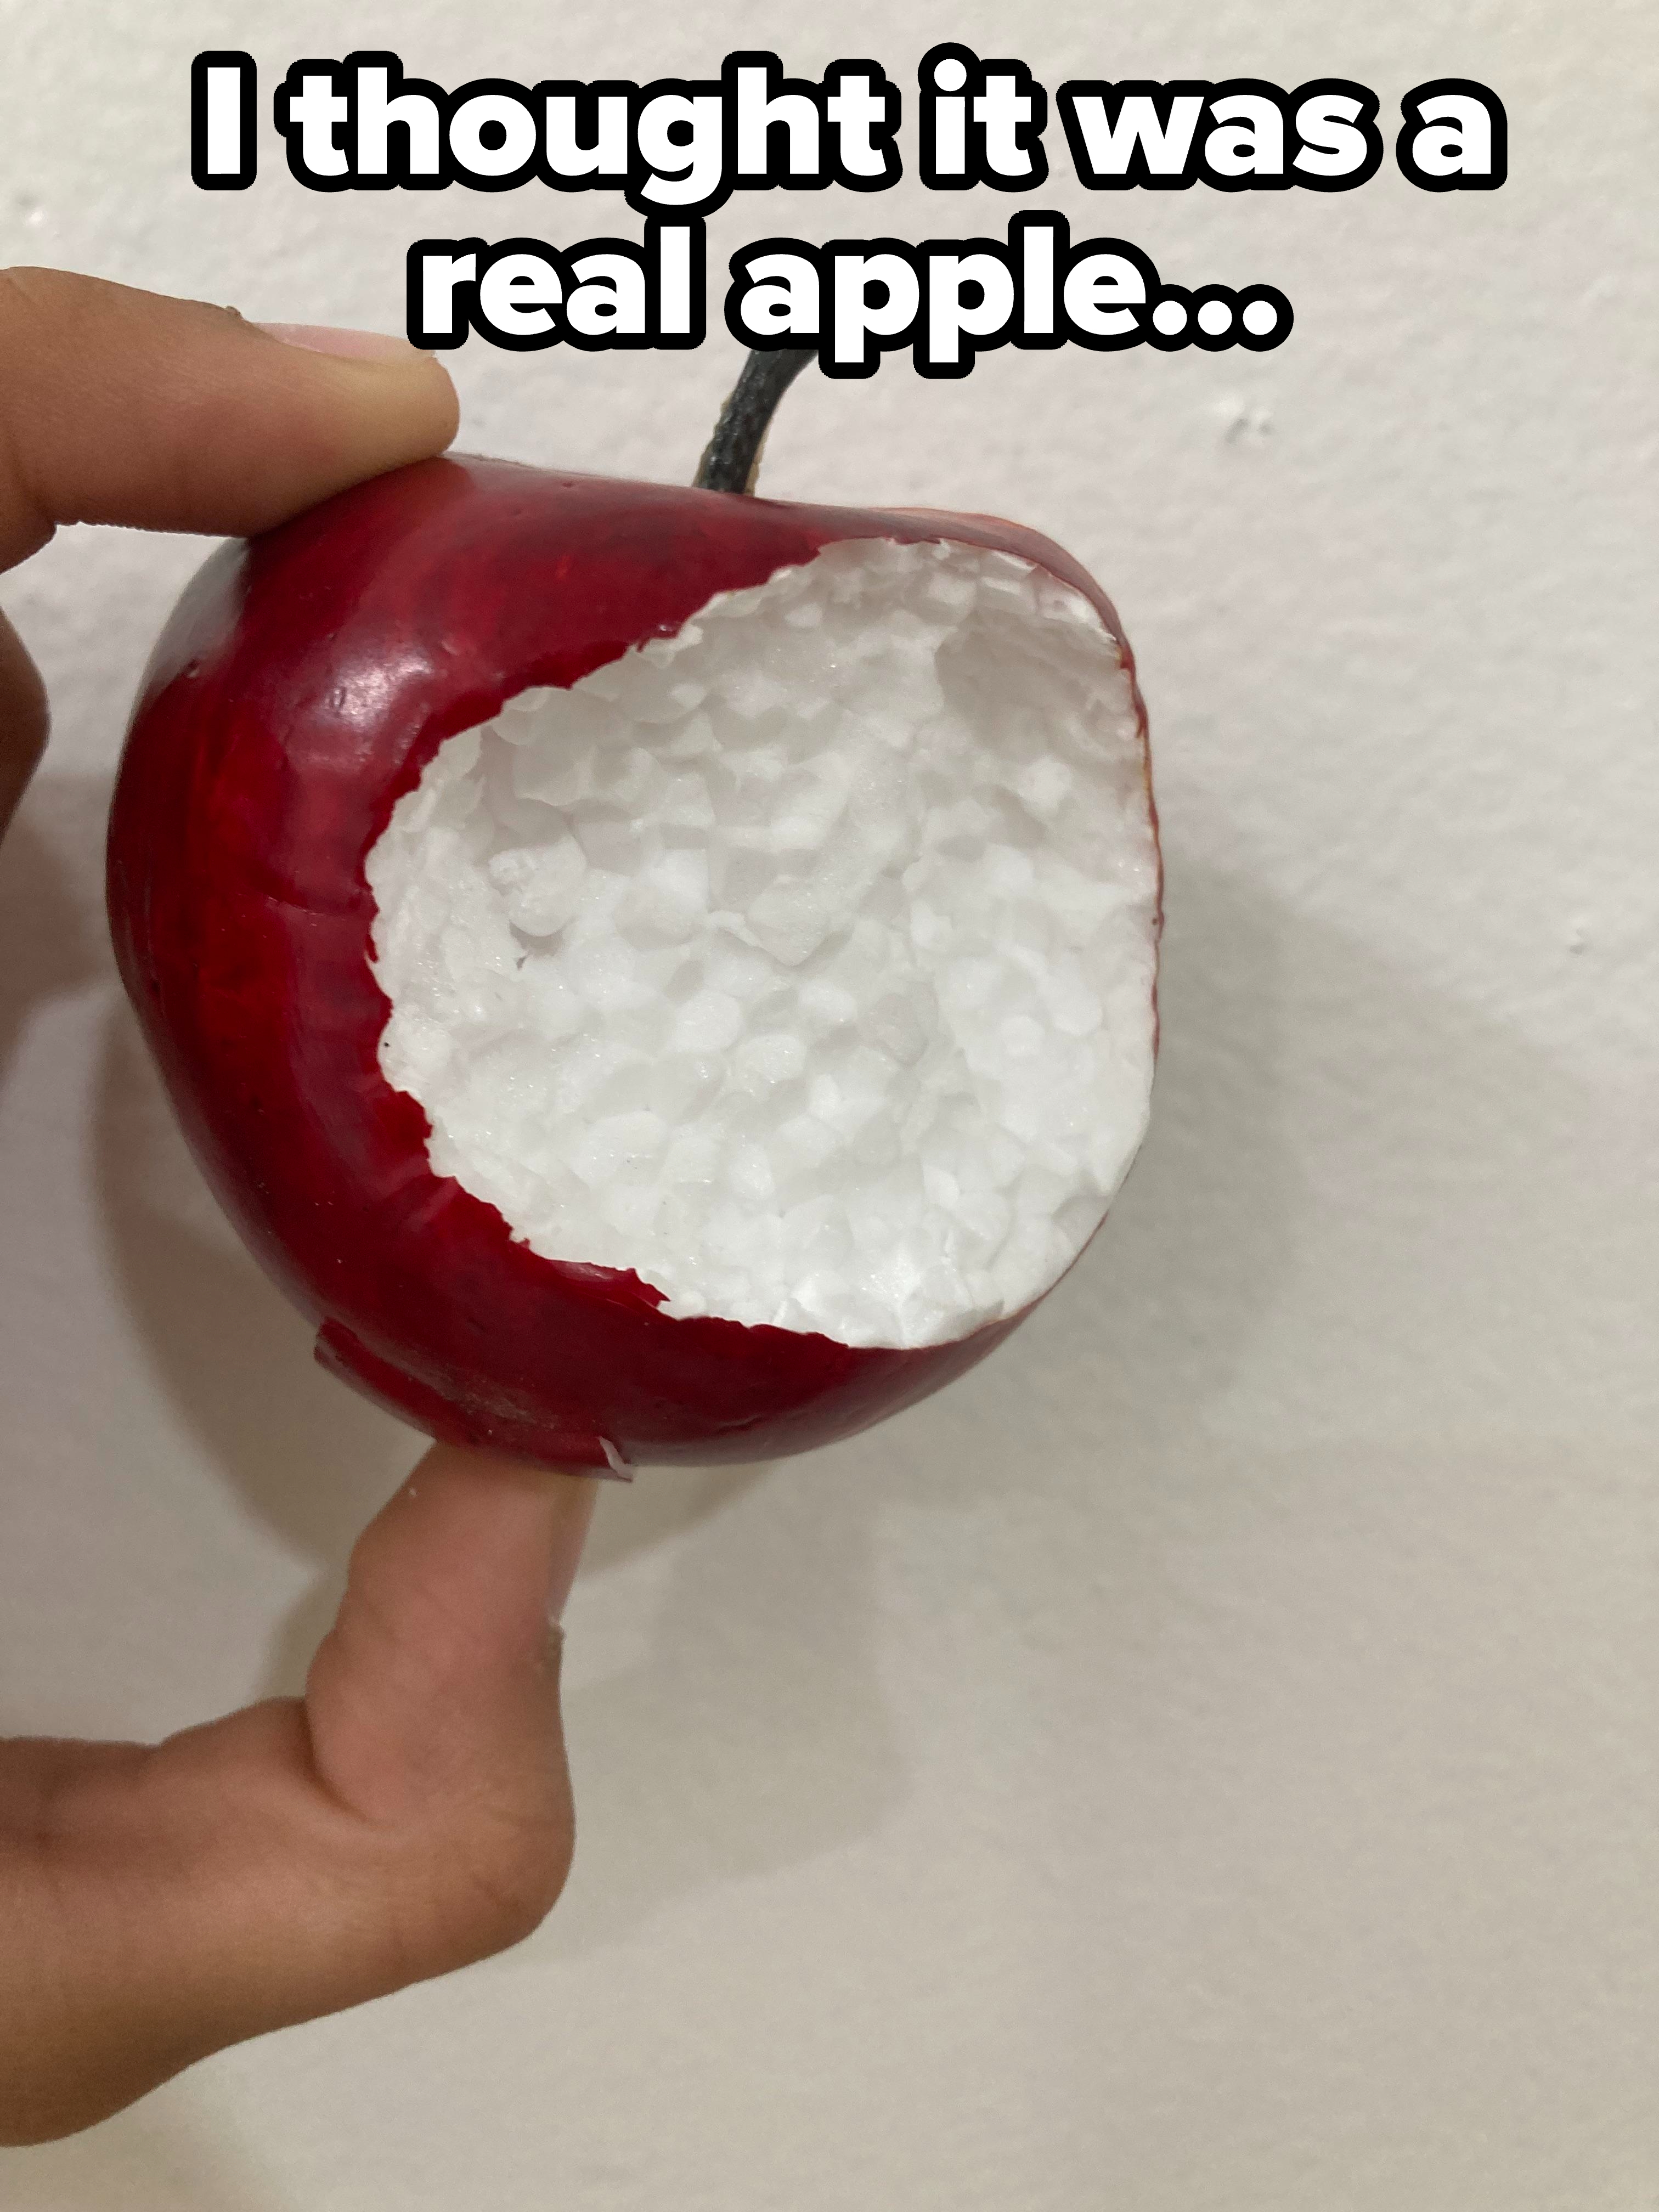 A fake apple with a bite taken out